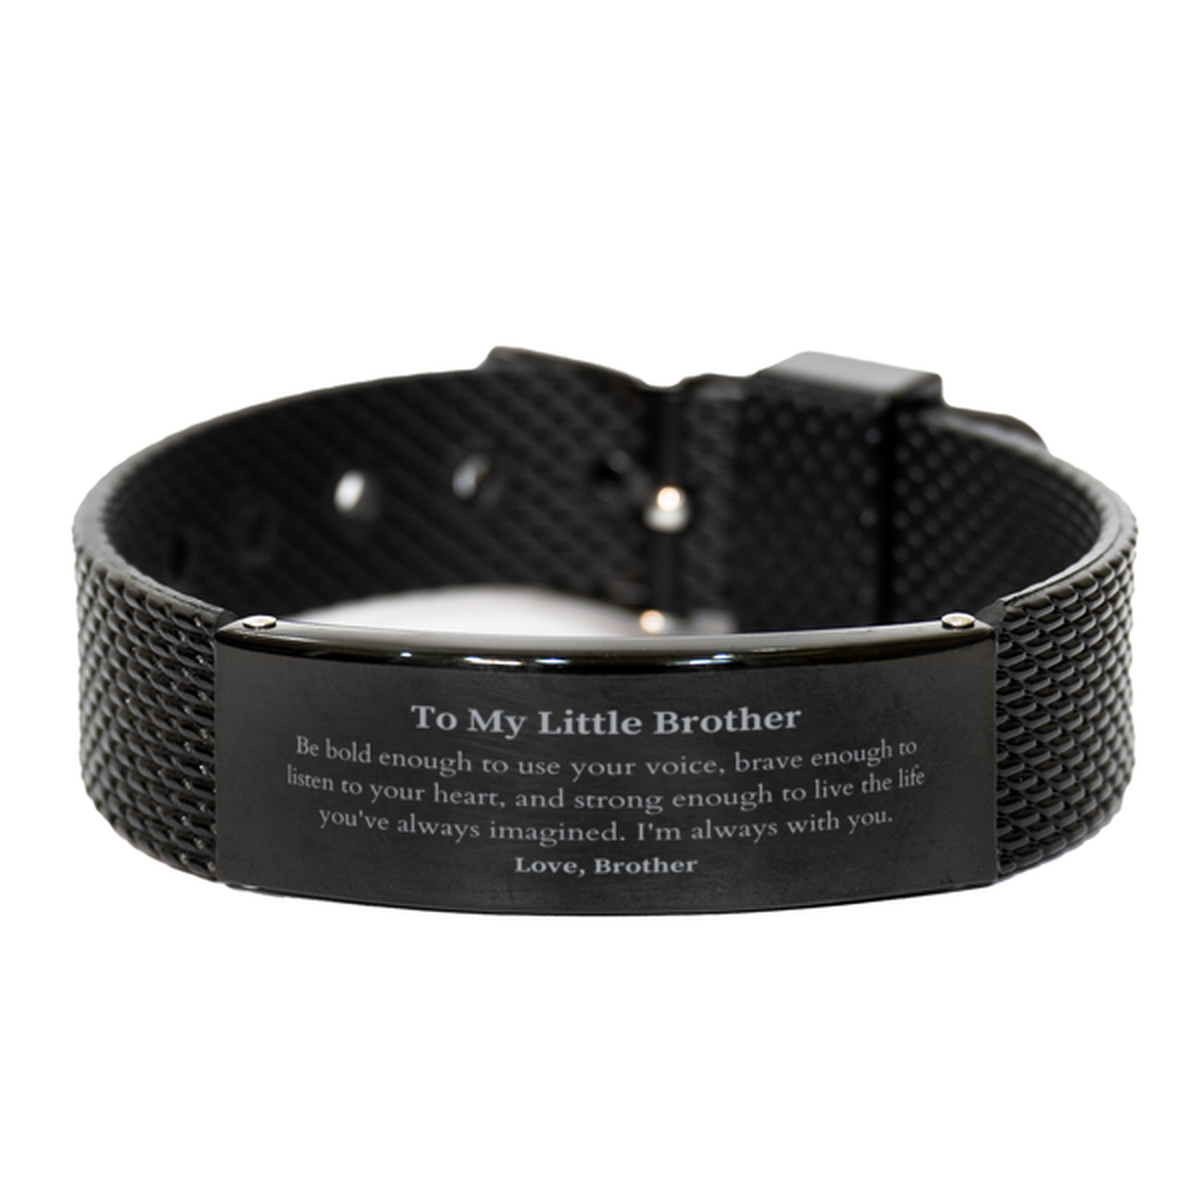 Keepsake Little Brother Black Shark Mesh Bracelet Gift Idea Graduation Christmas Birthday Little Brother from Brother, Little Brother Be bold enough to use your voice, brave enough to listen to your heart. Love, Brother